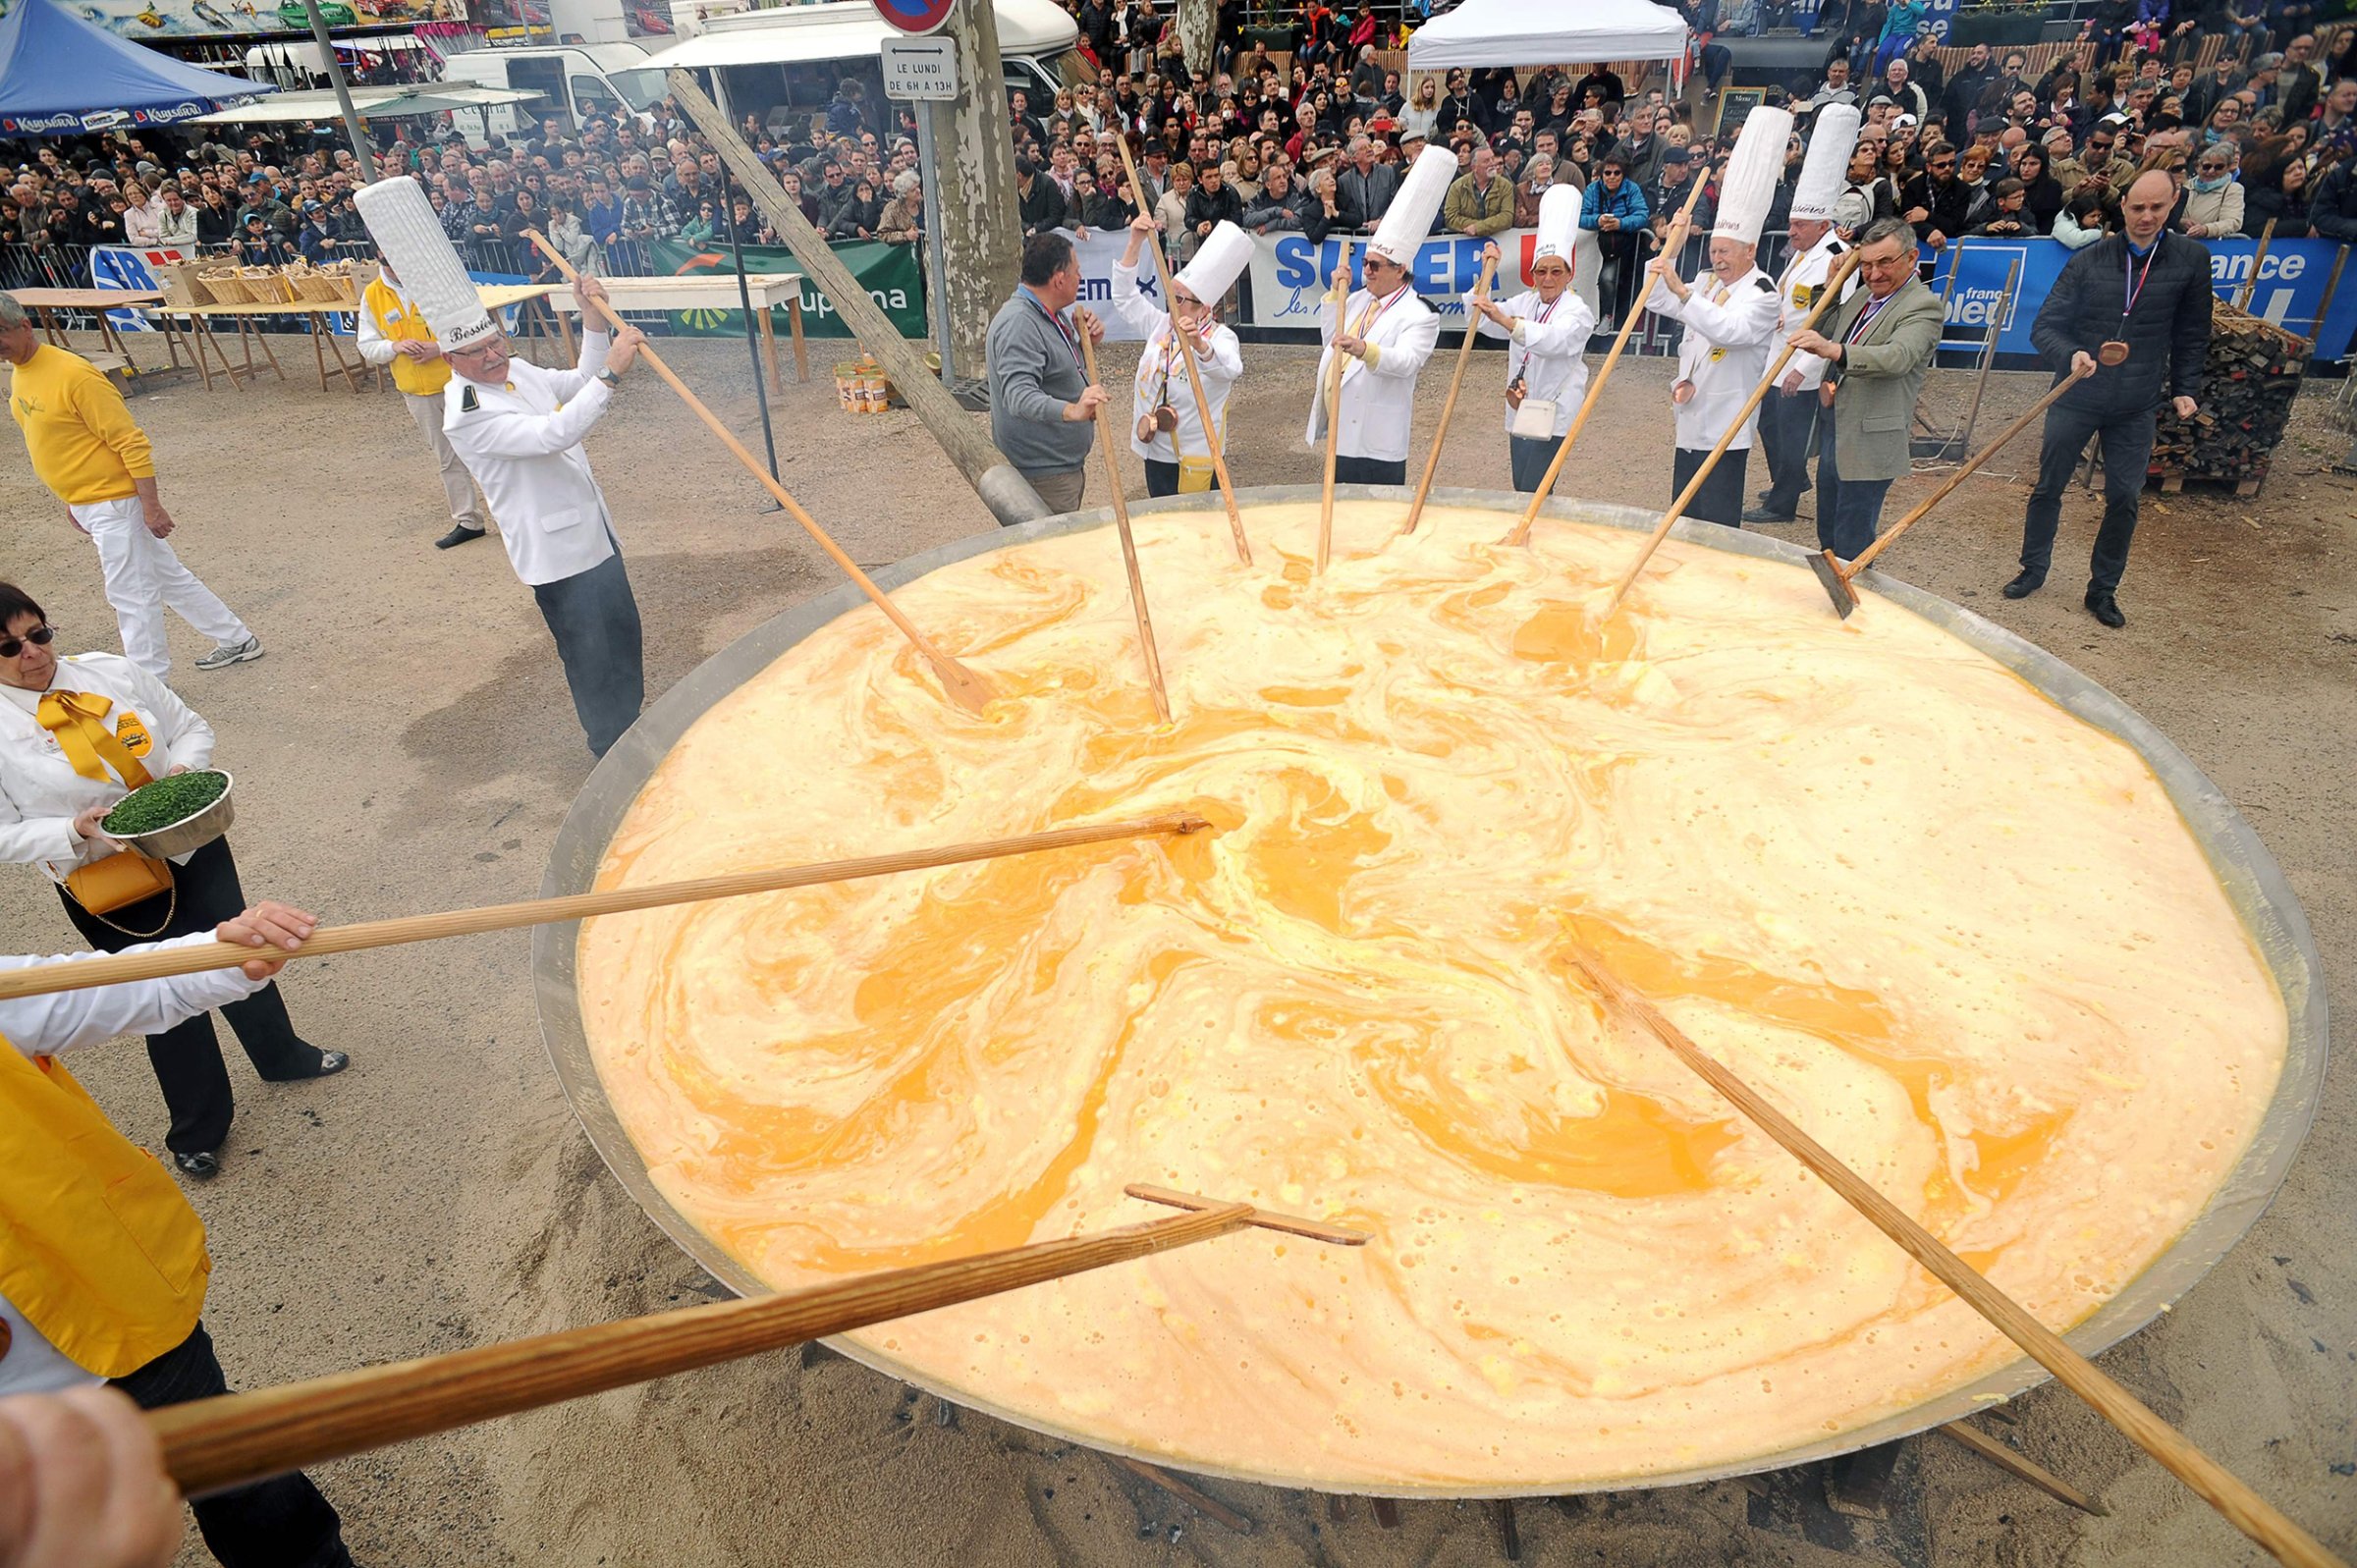 Members of the Giant Omelette Brotherhood of Bessieres cook a giant omelette as part of Easter celebrations in the main square of Bessieres, southern France on March 28, 2016.